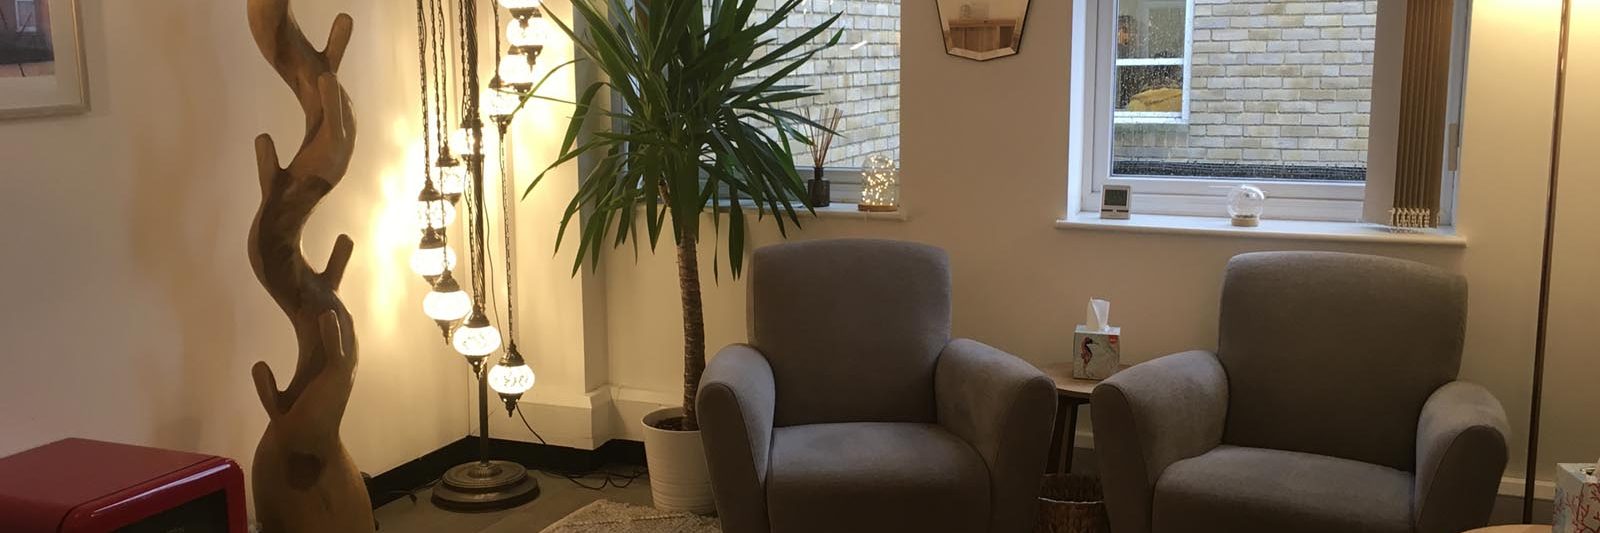 Michelle Manzi's counselling room in Finchley